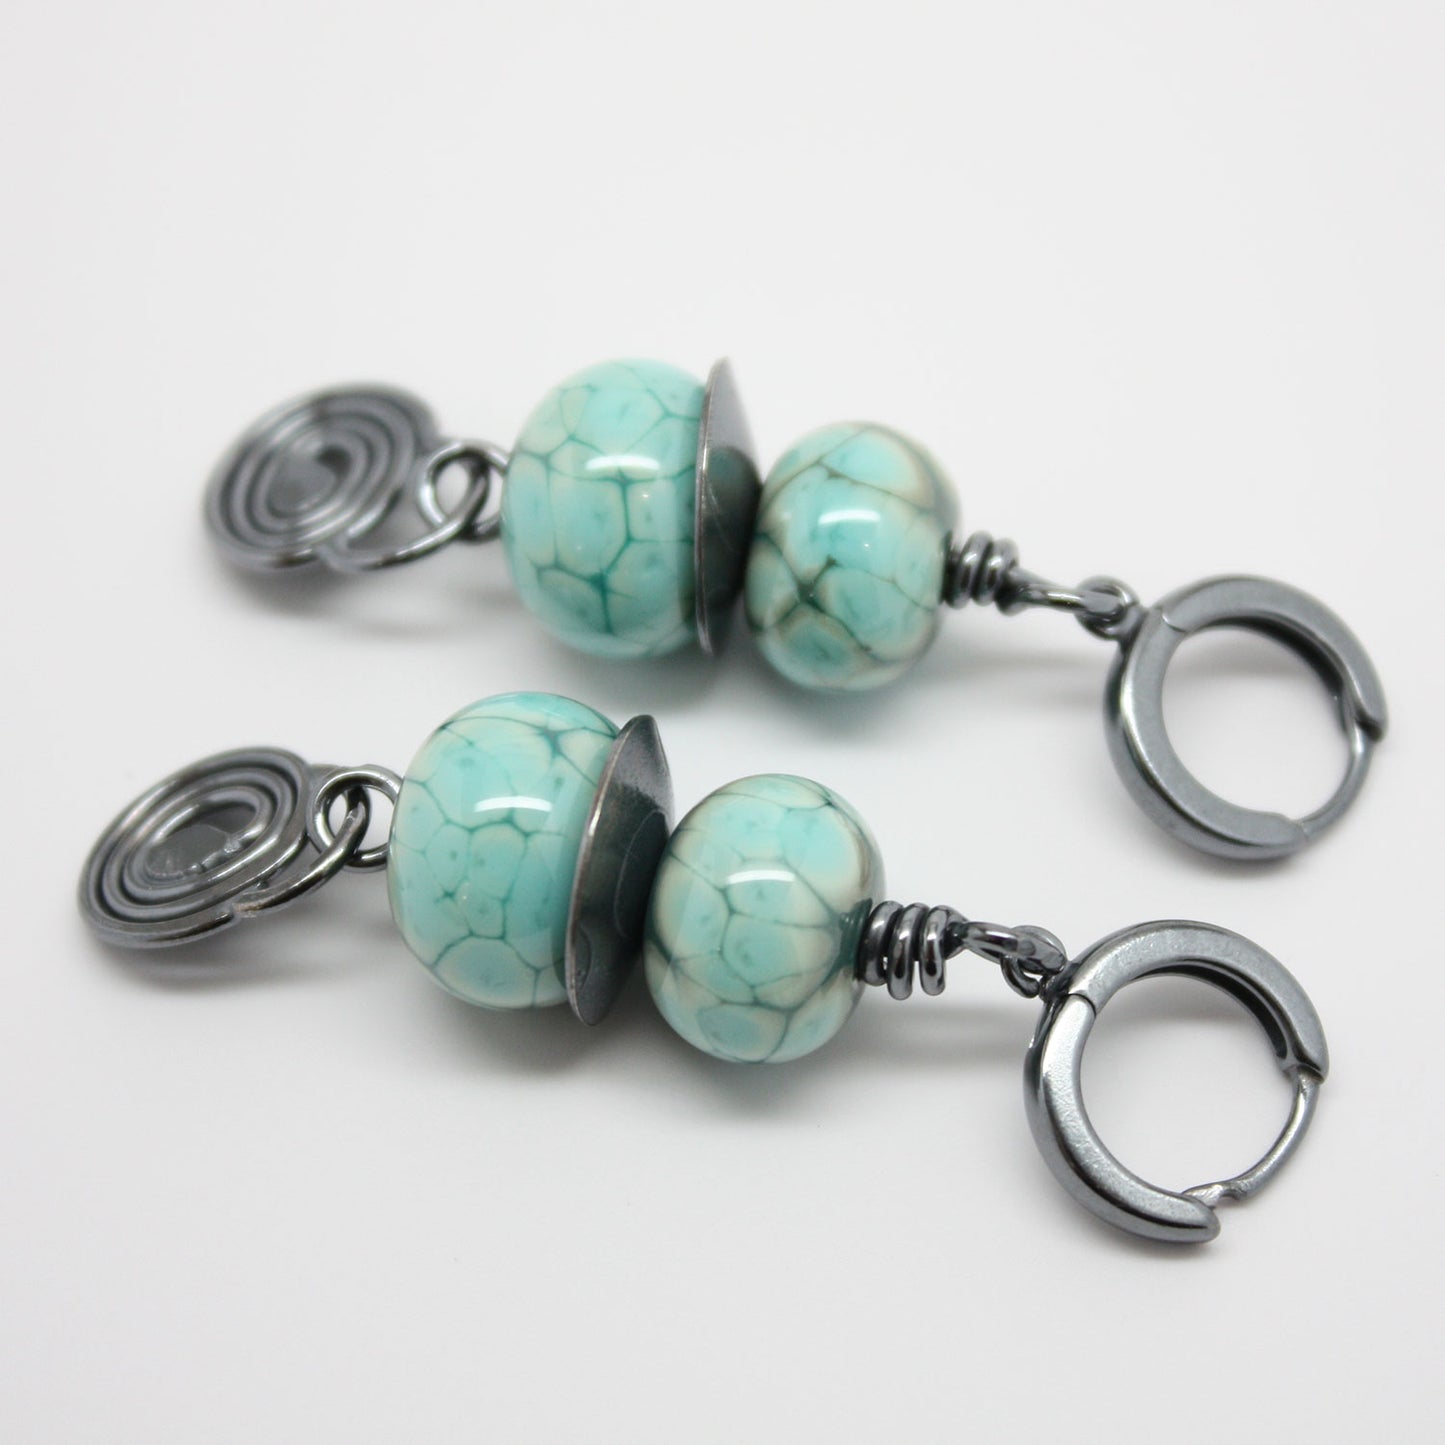 Handmade Turquoise Green Earrings with Sterling Silver Hinged Hoops 